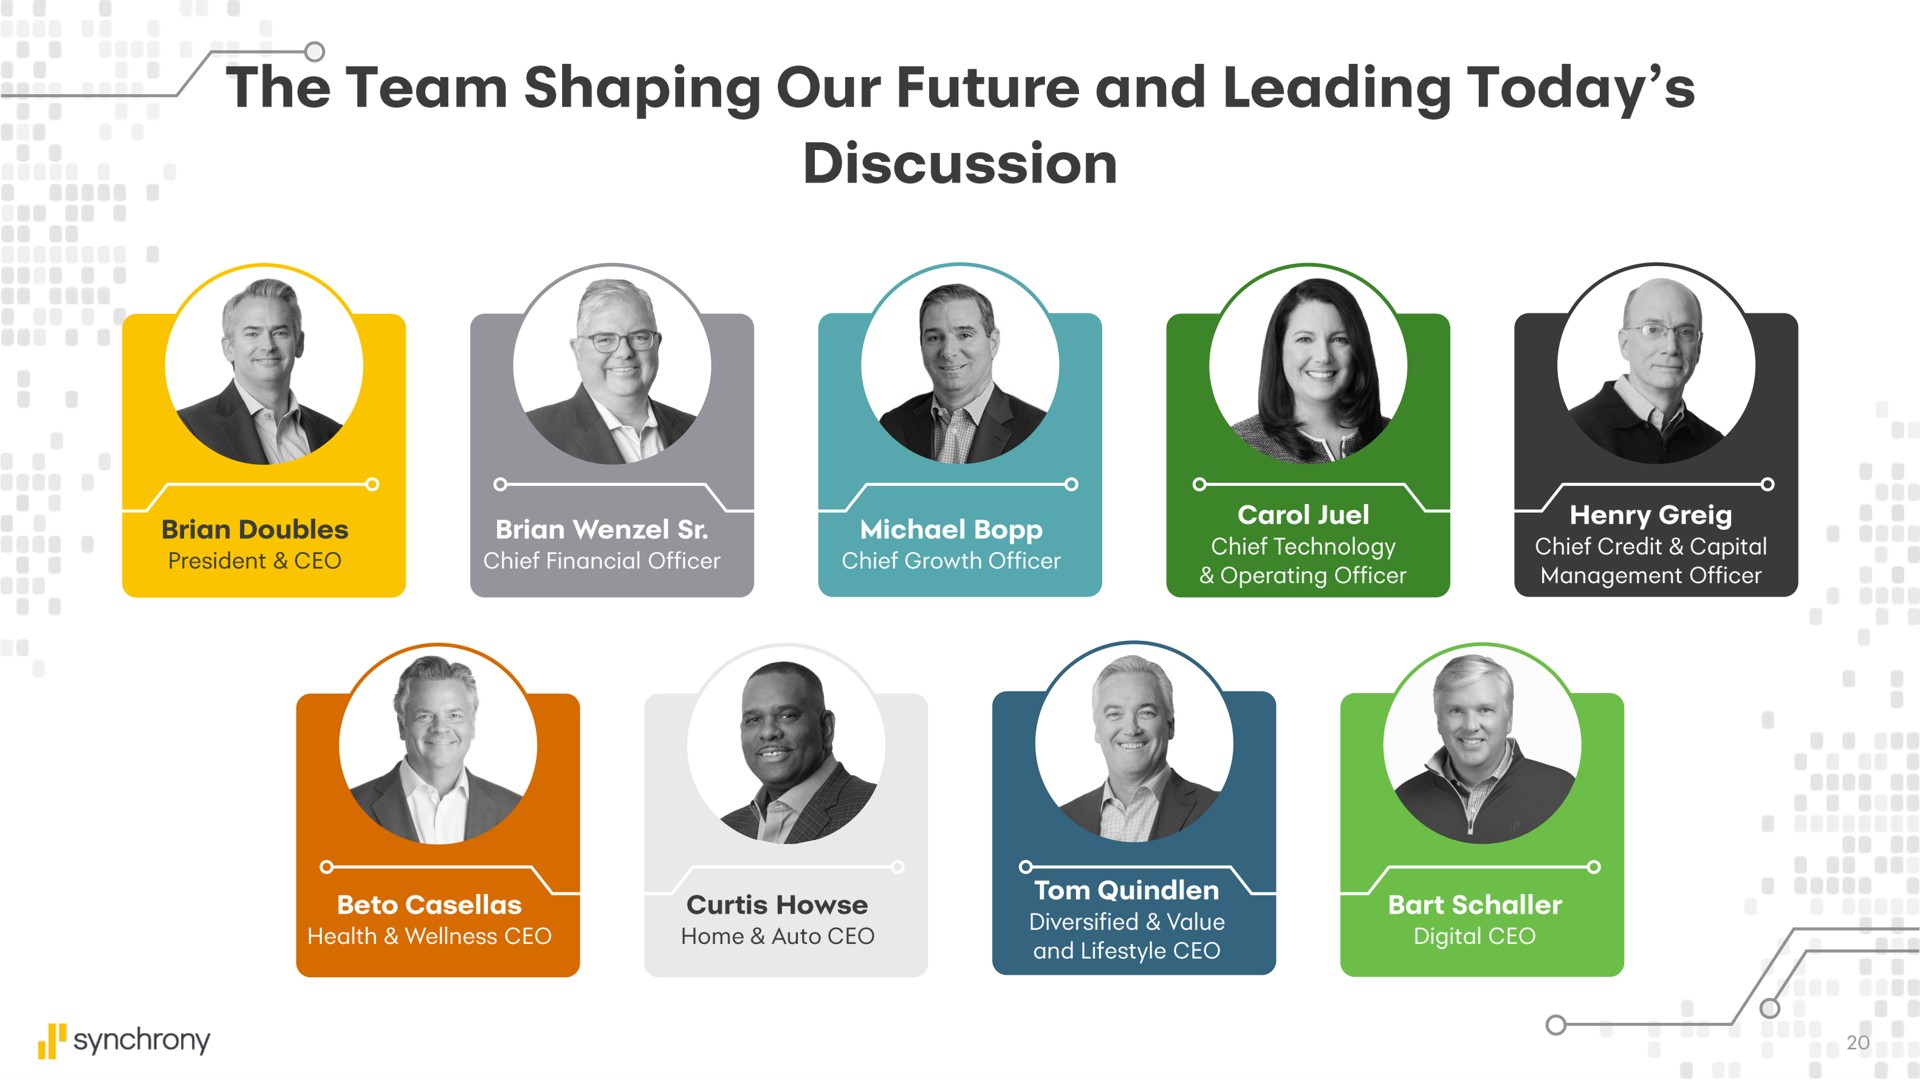 the team shaping our future and leading today discussion | Synchrony Financial